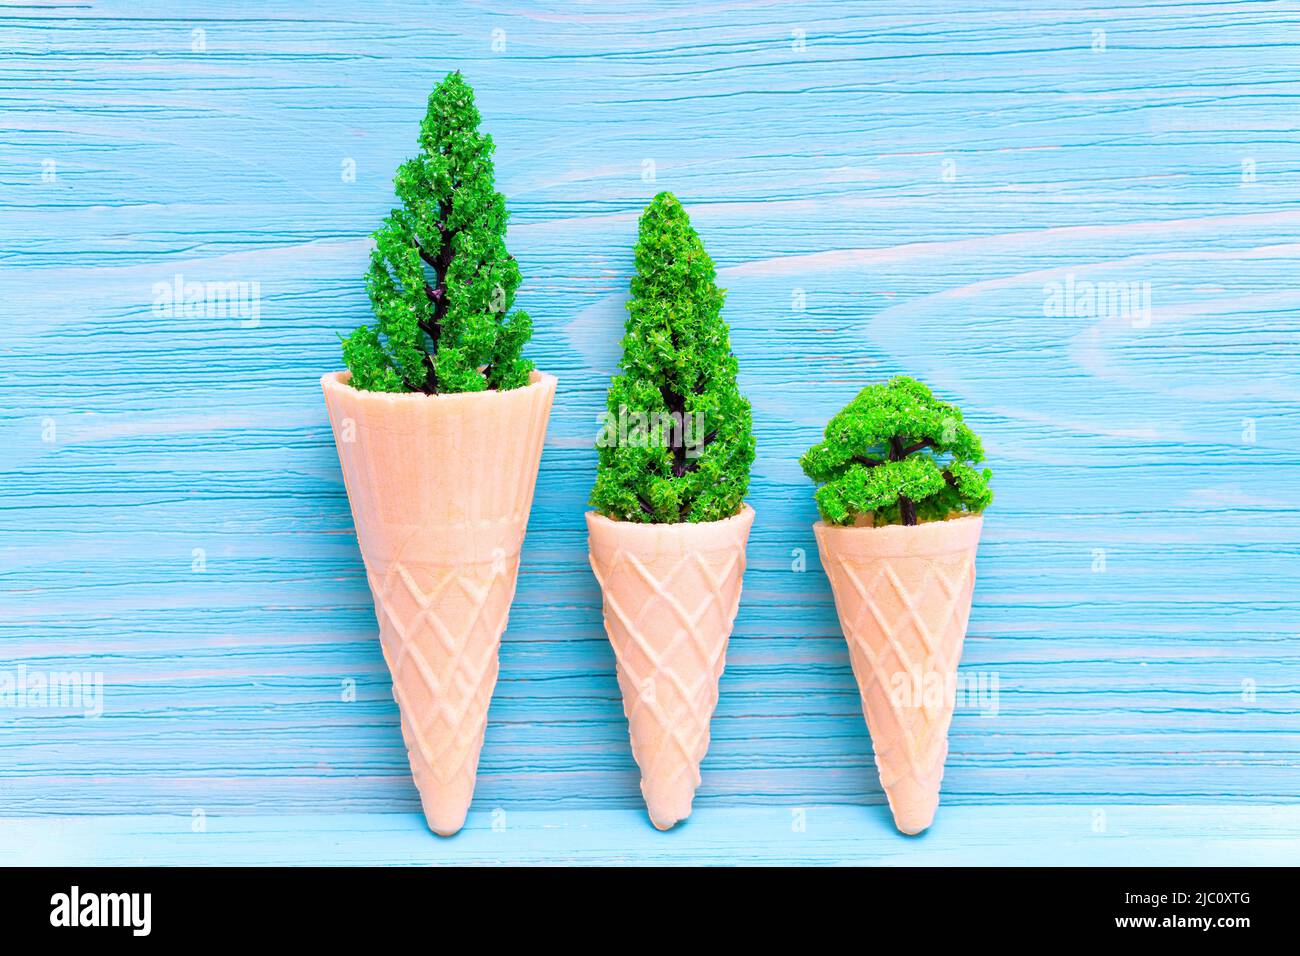 Three tiny trees in waffle cones isolated on a blue textured wooden background. Stock Photo